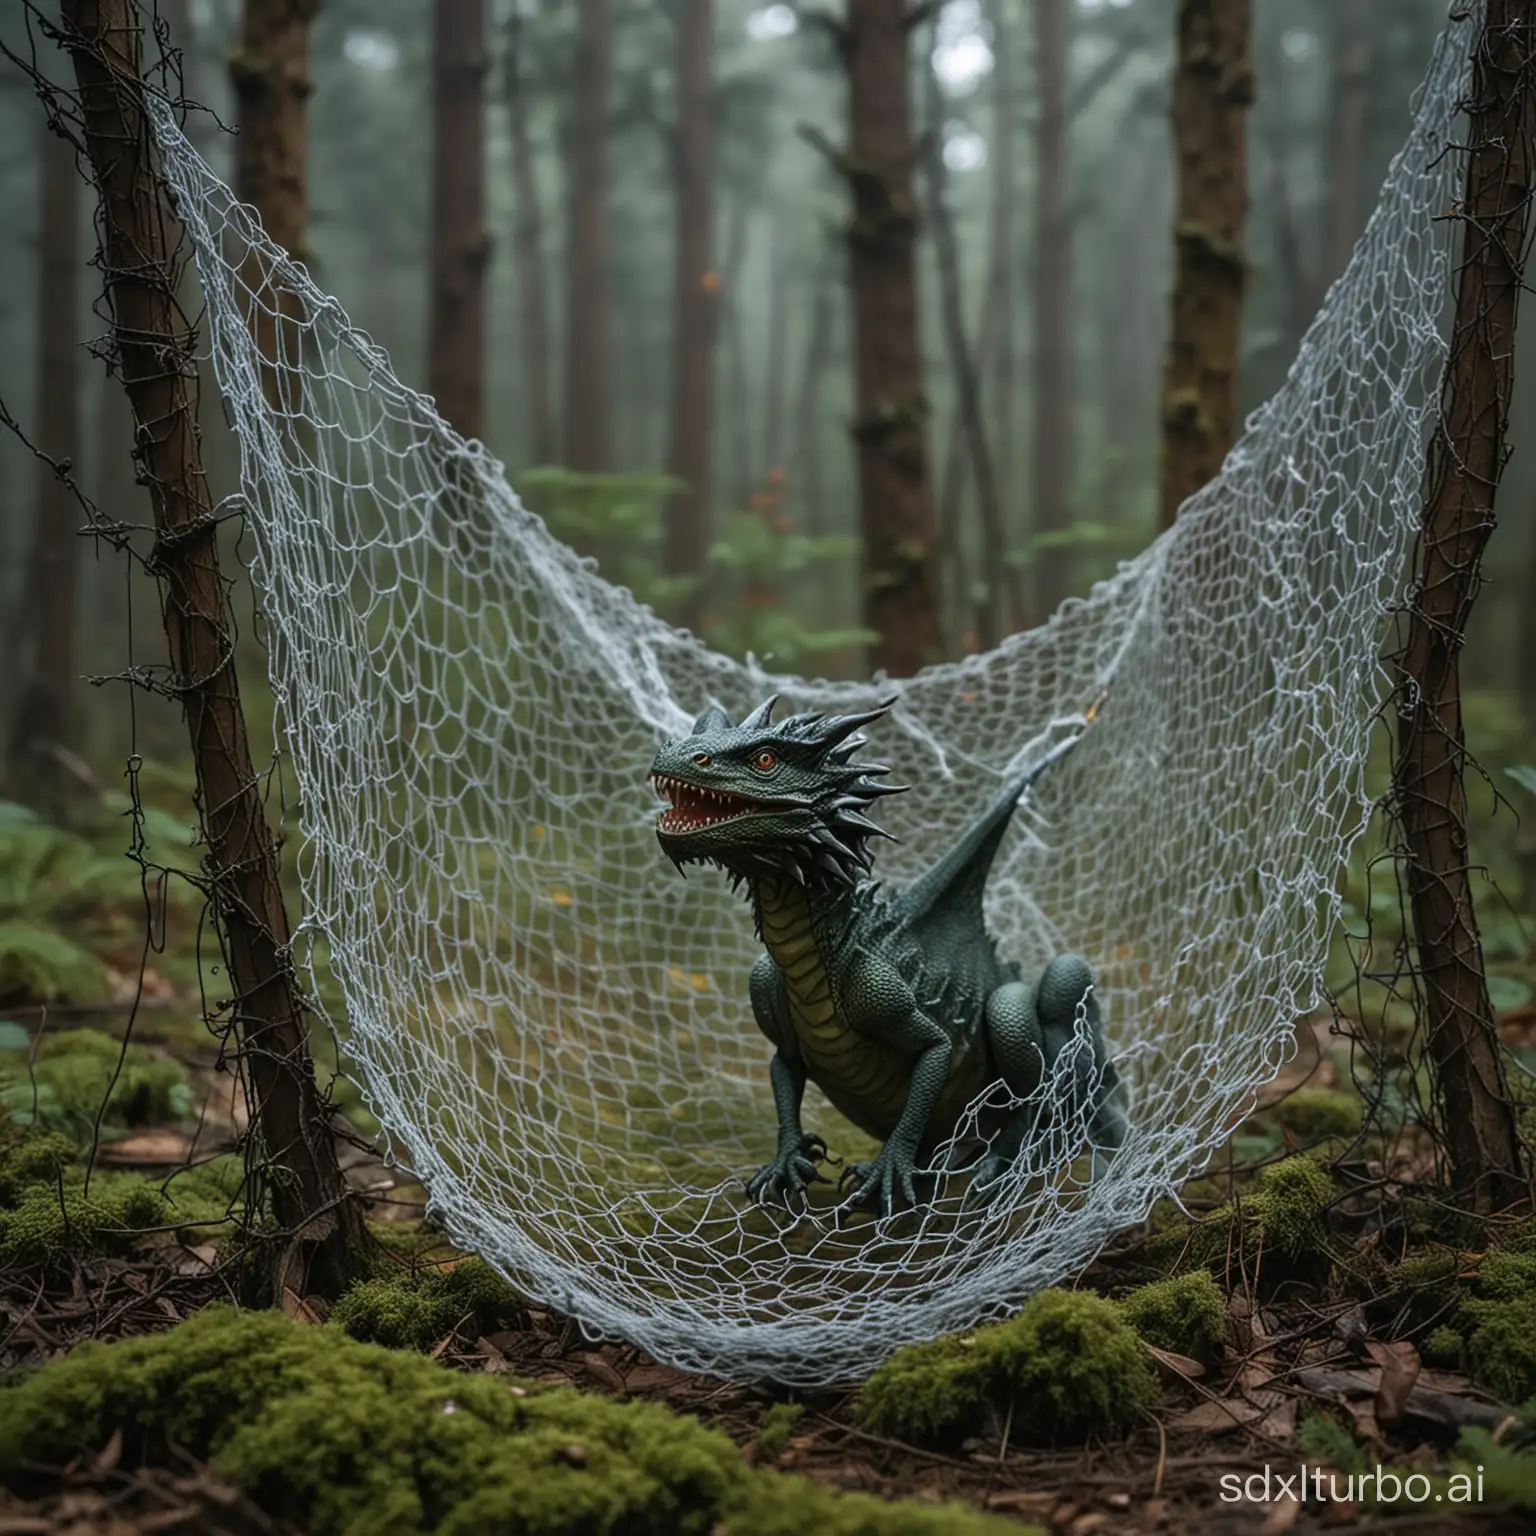 Tiny-Dragon-Trapped-in-Forest-Net